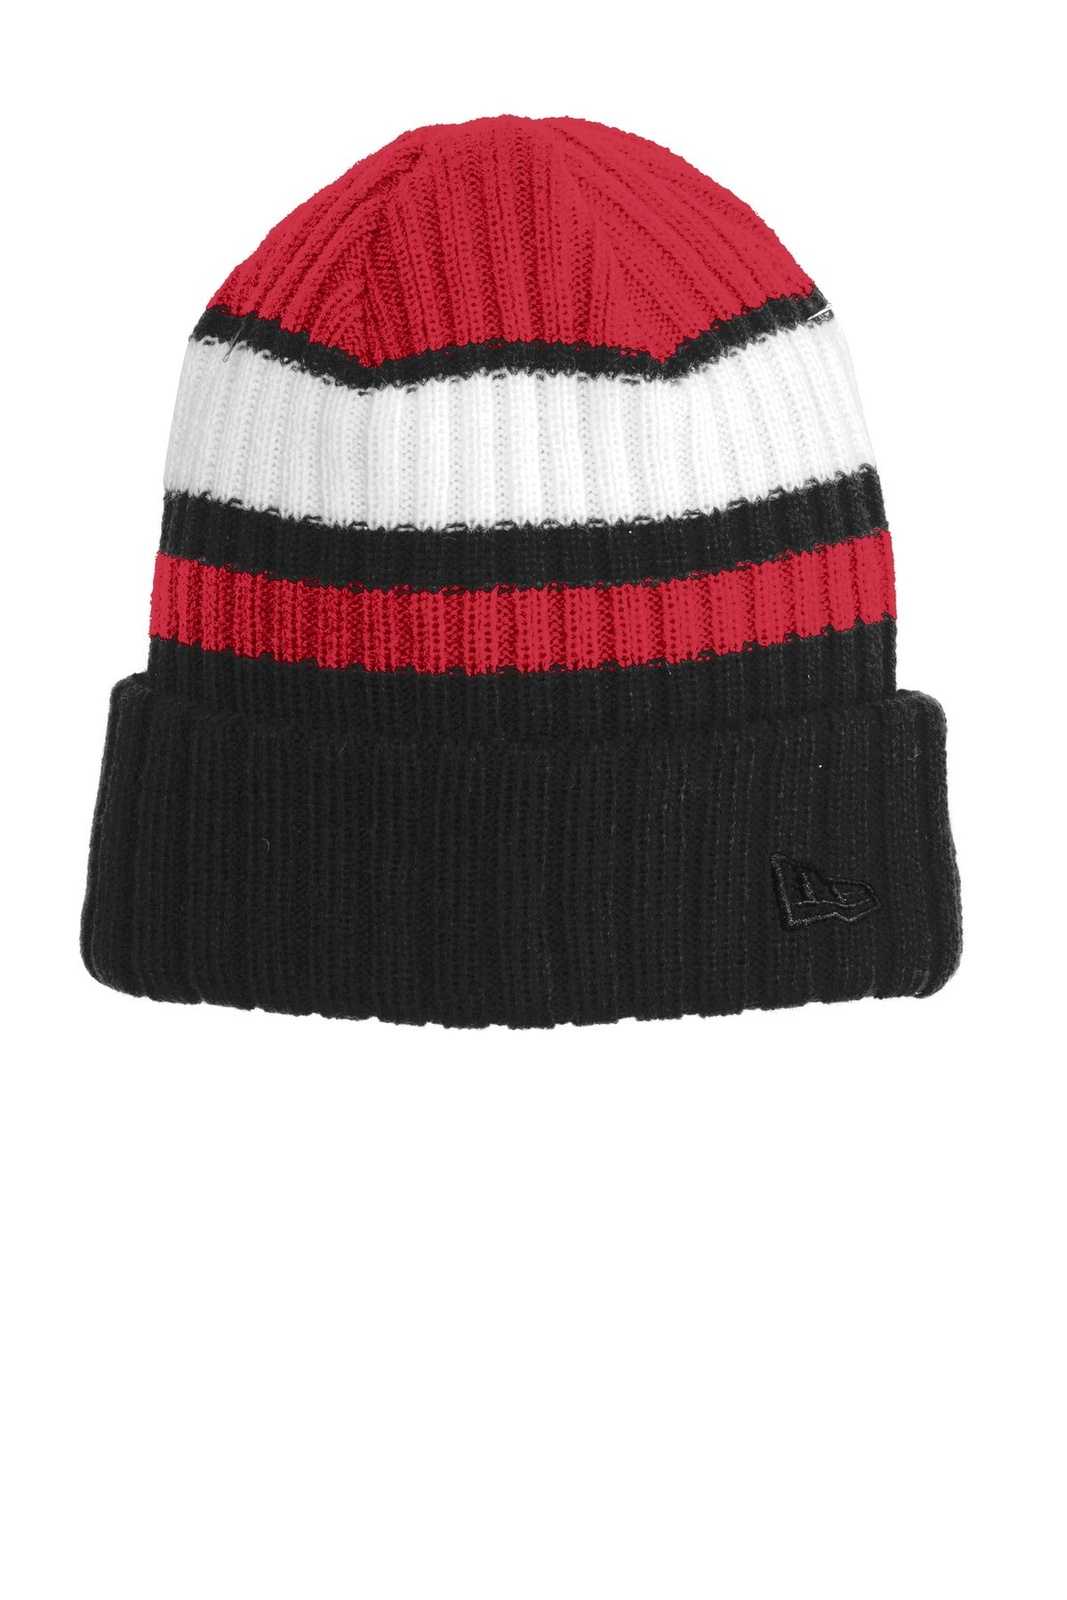 New Era NE903 Ribbed Tailgate Beanie - Red Black - HIT a Double